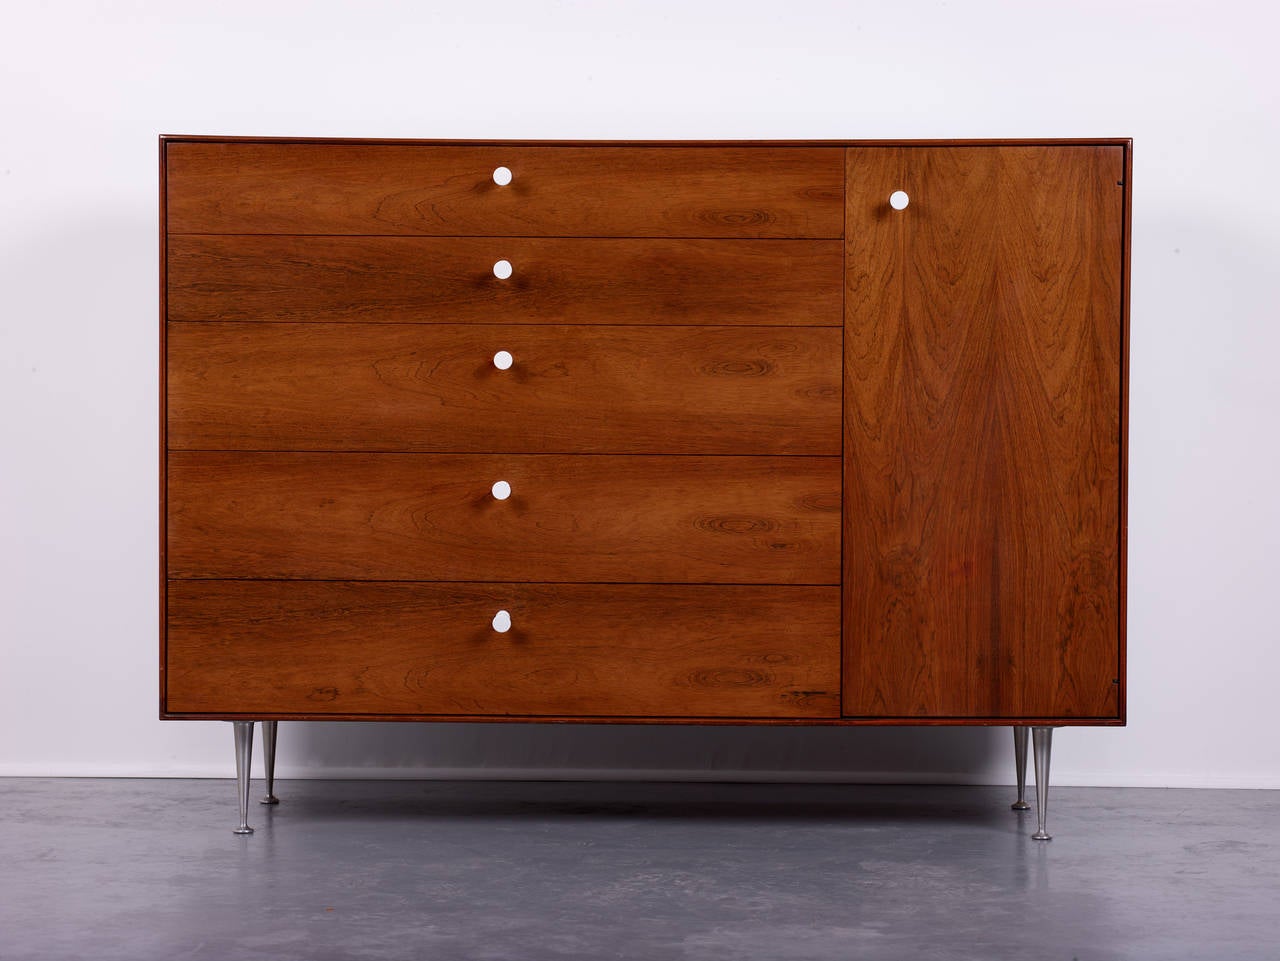 George Nelson & Associates.

Thin edge cabinet, model 5245.

Herman Miller,
USA, 1952.
Rosewood, aluminum, porcelain.
Measures: 55.5 W x 18.5 D x 40.5 H inches.